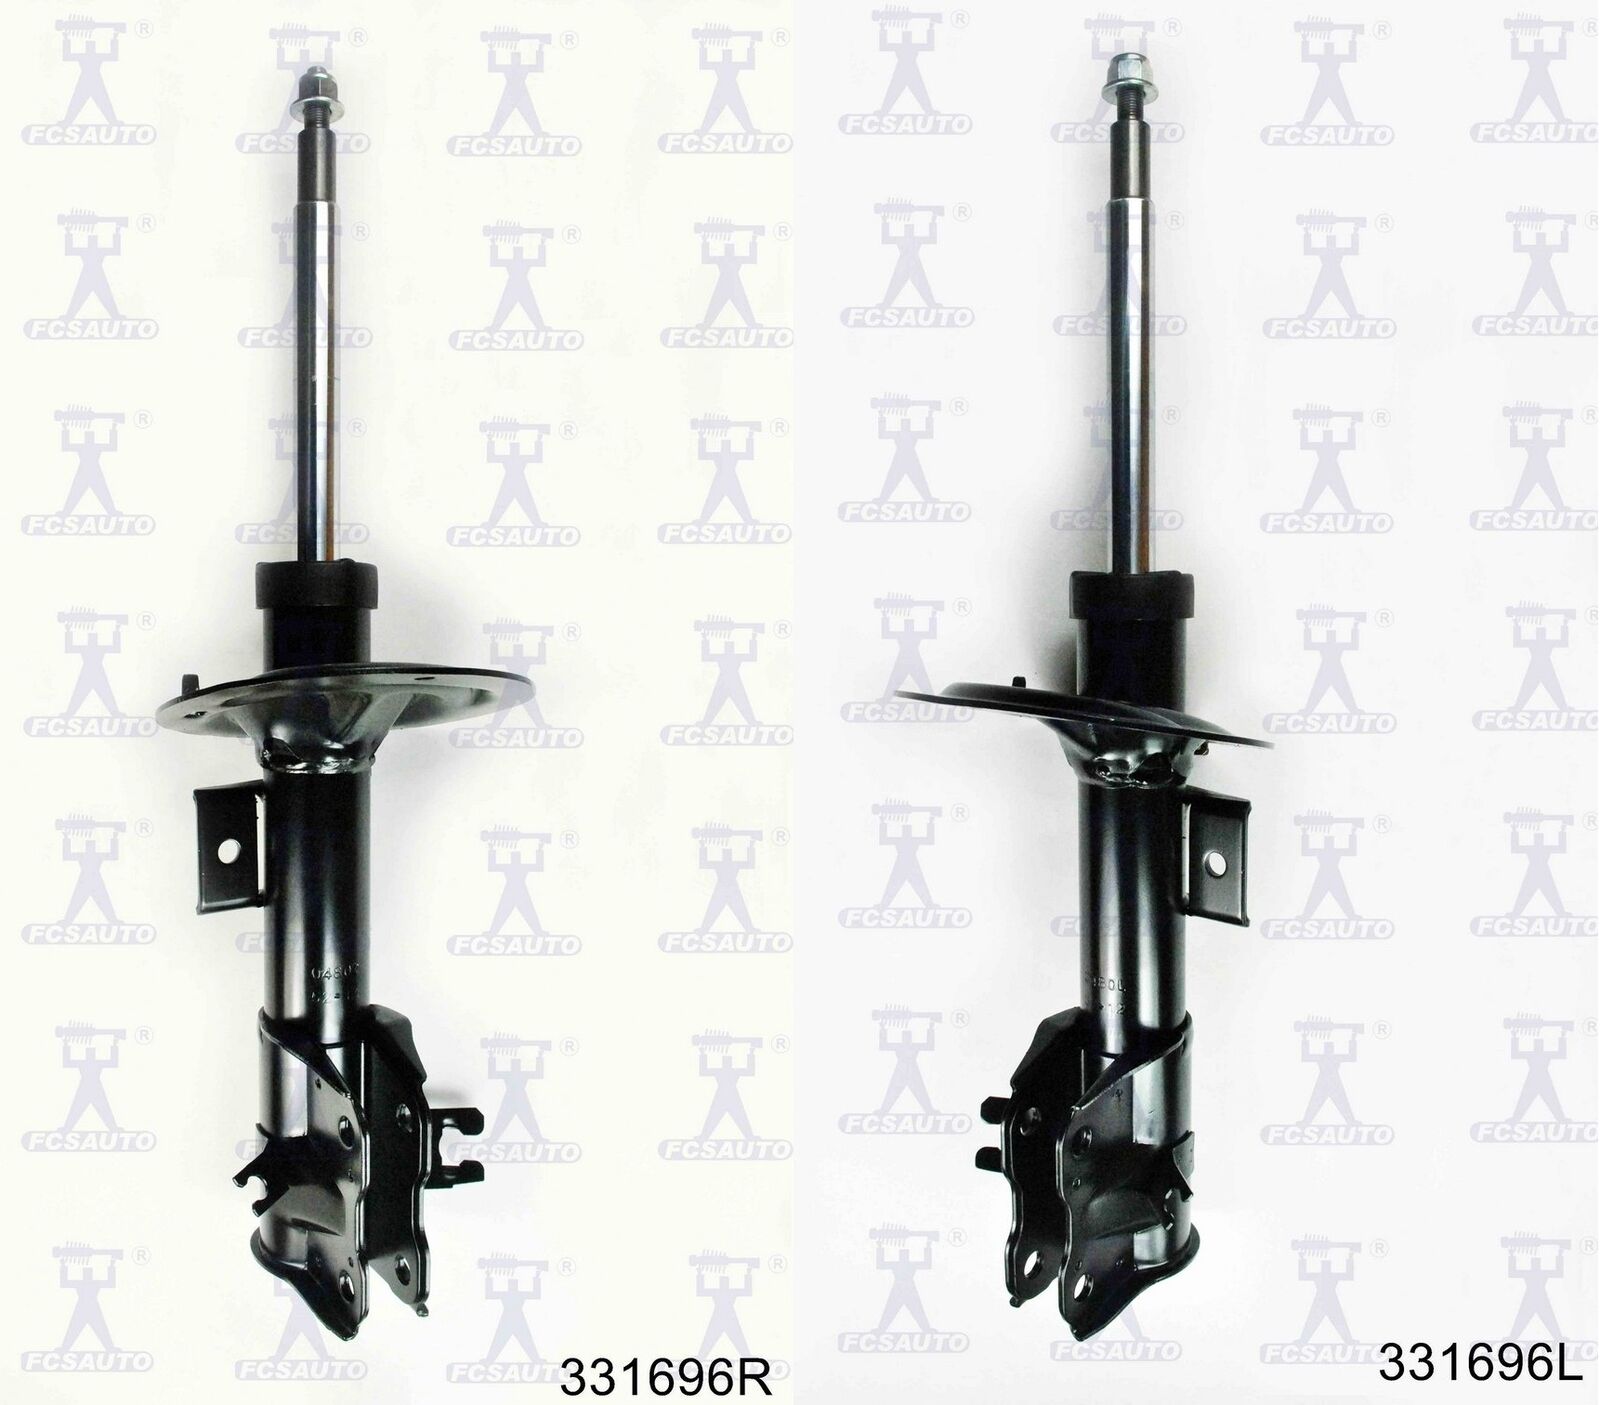 NEW Pair Set of 2 Front FCS Suspension Strut Assemblies For Volvo S40 V40 01-04